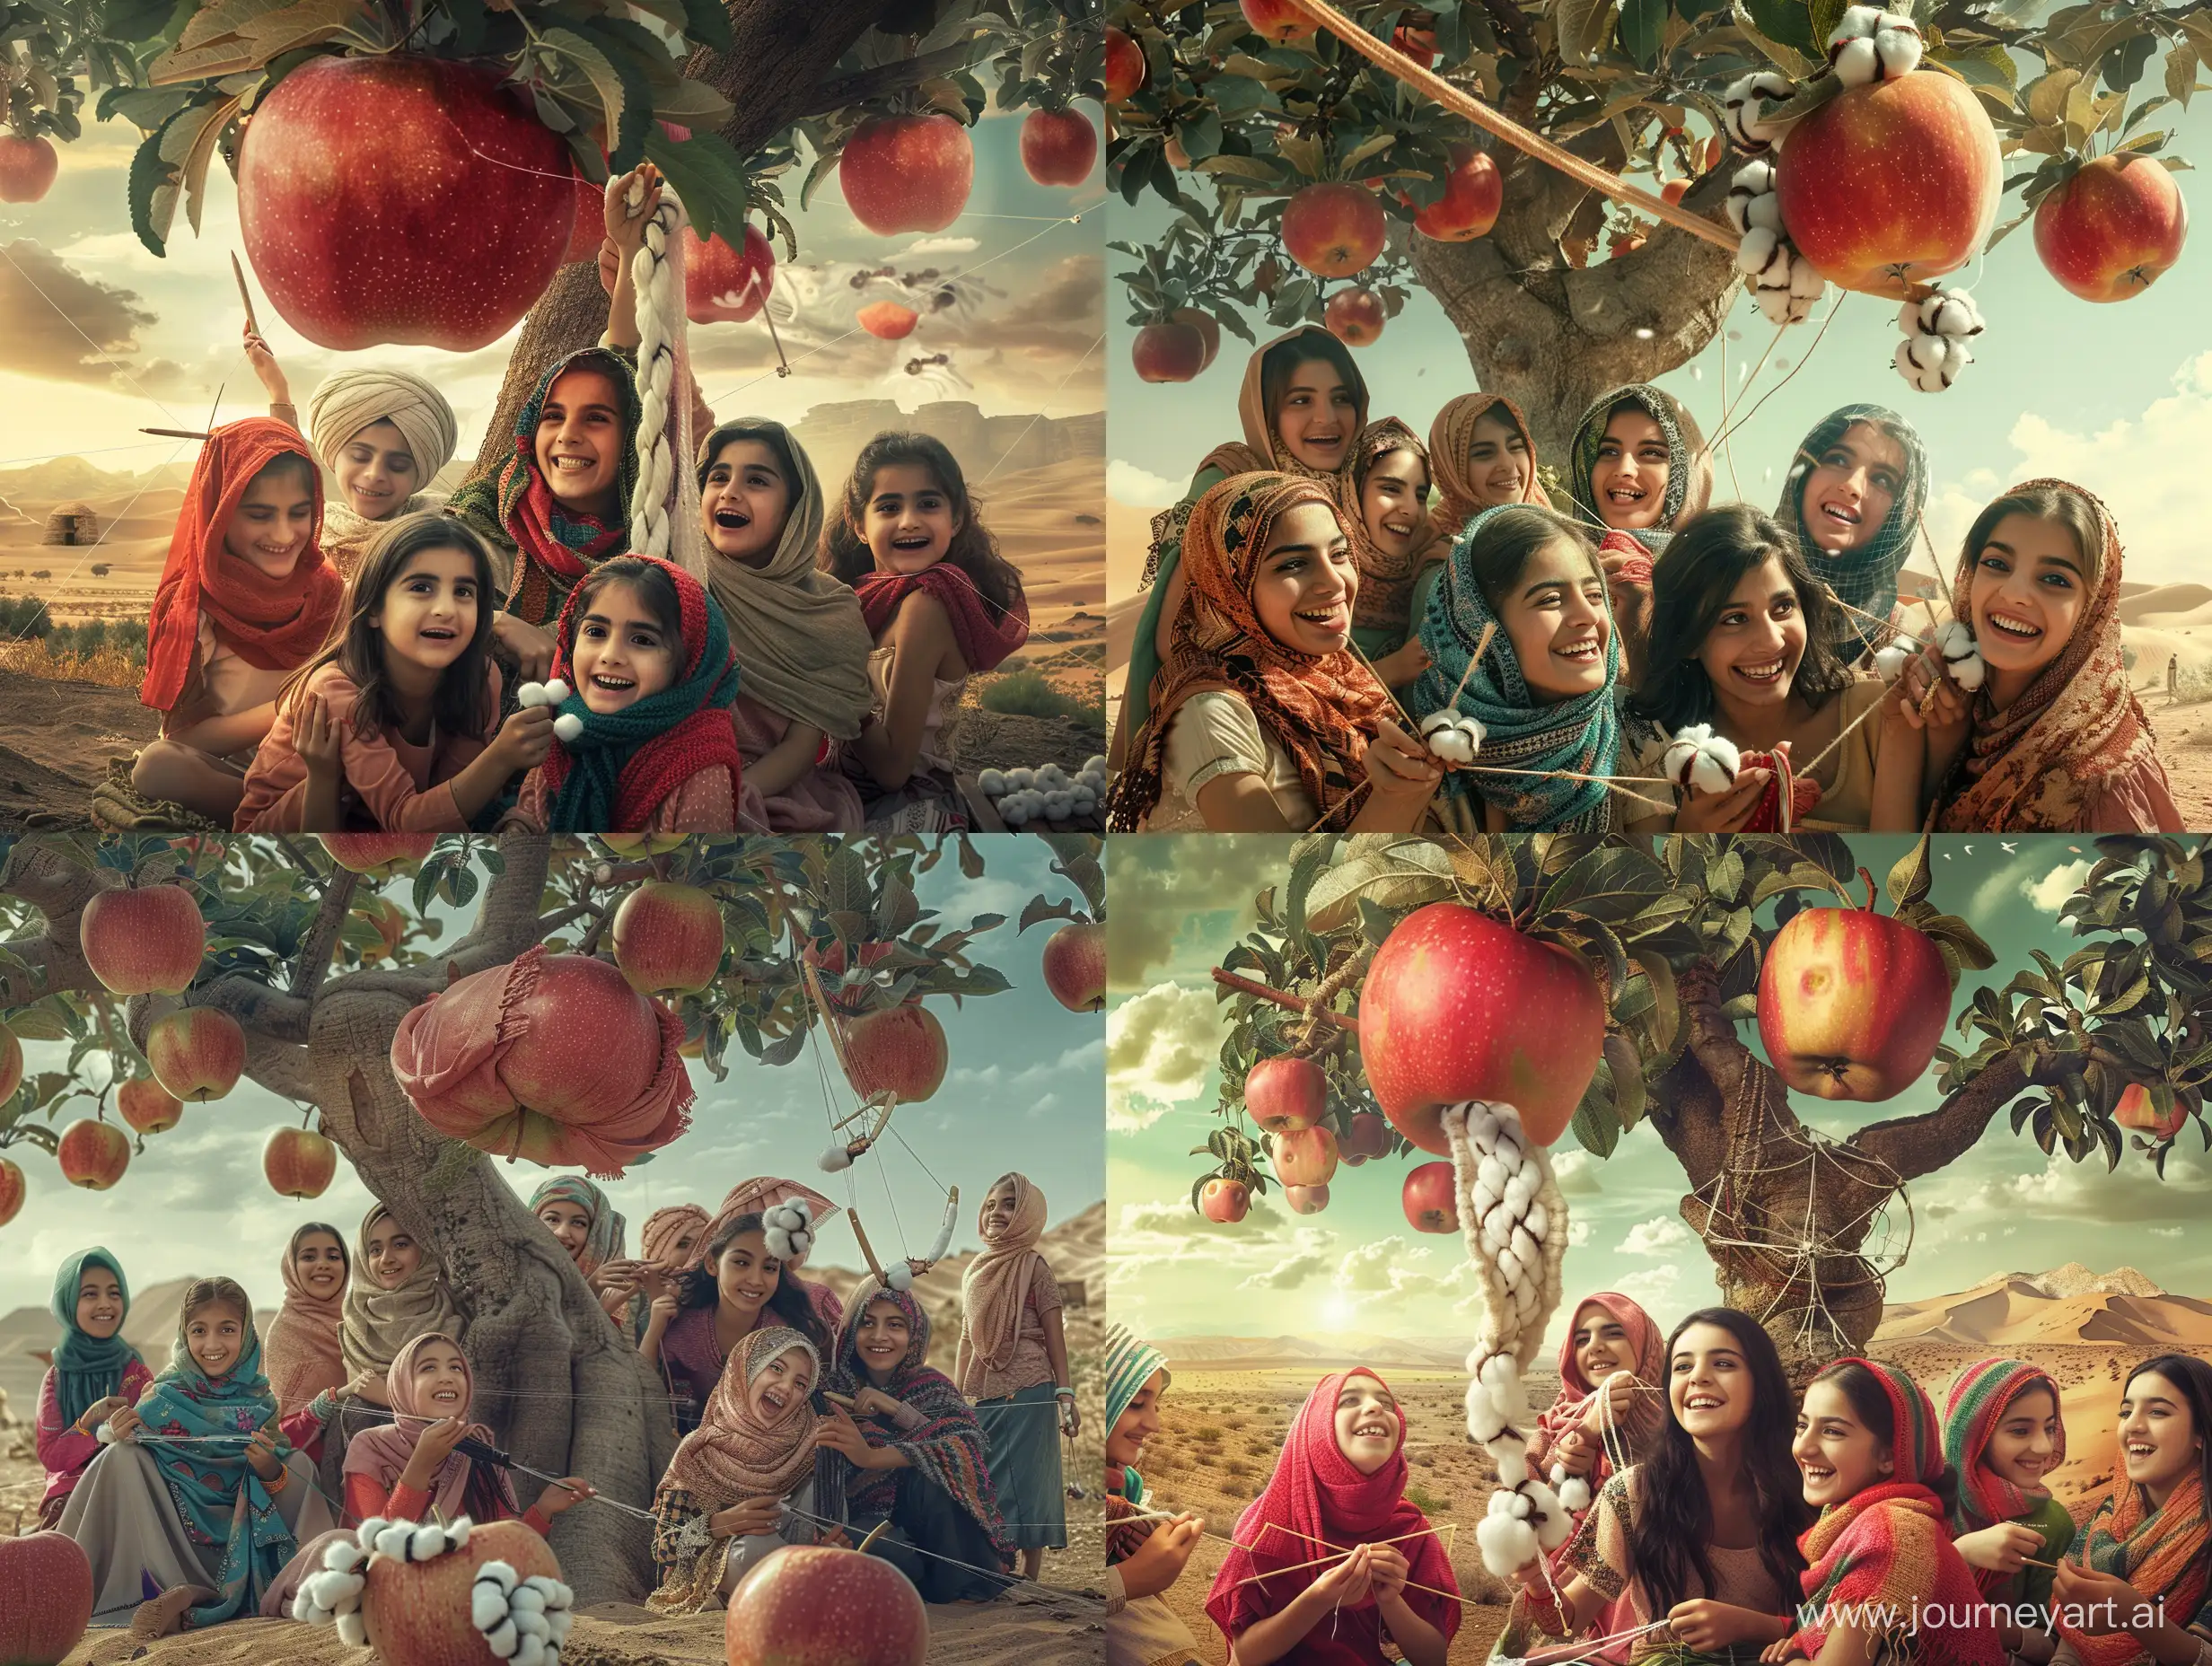 Persian-Women-Knitting-Scarves-under-Giant-Apple-Tree-in-Ancient-Civilization